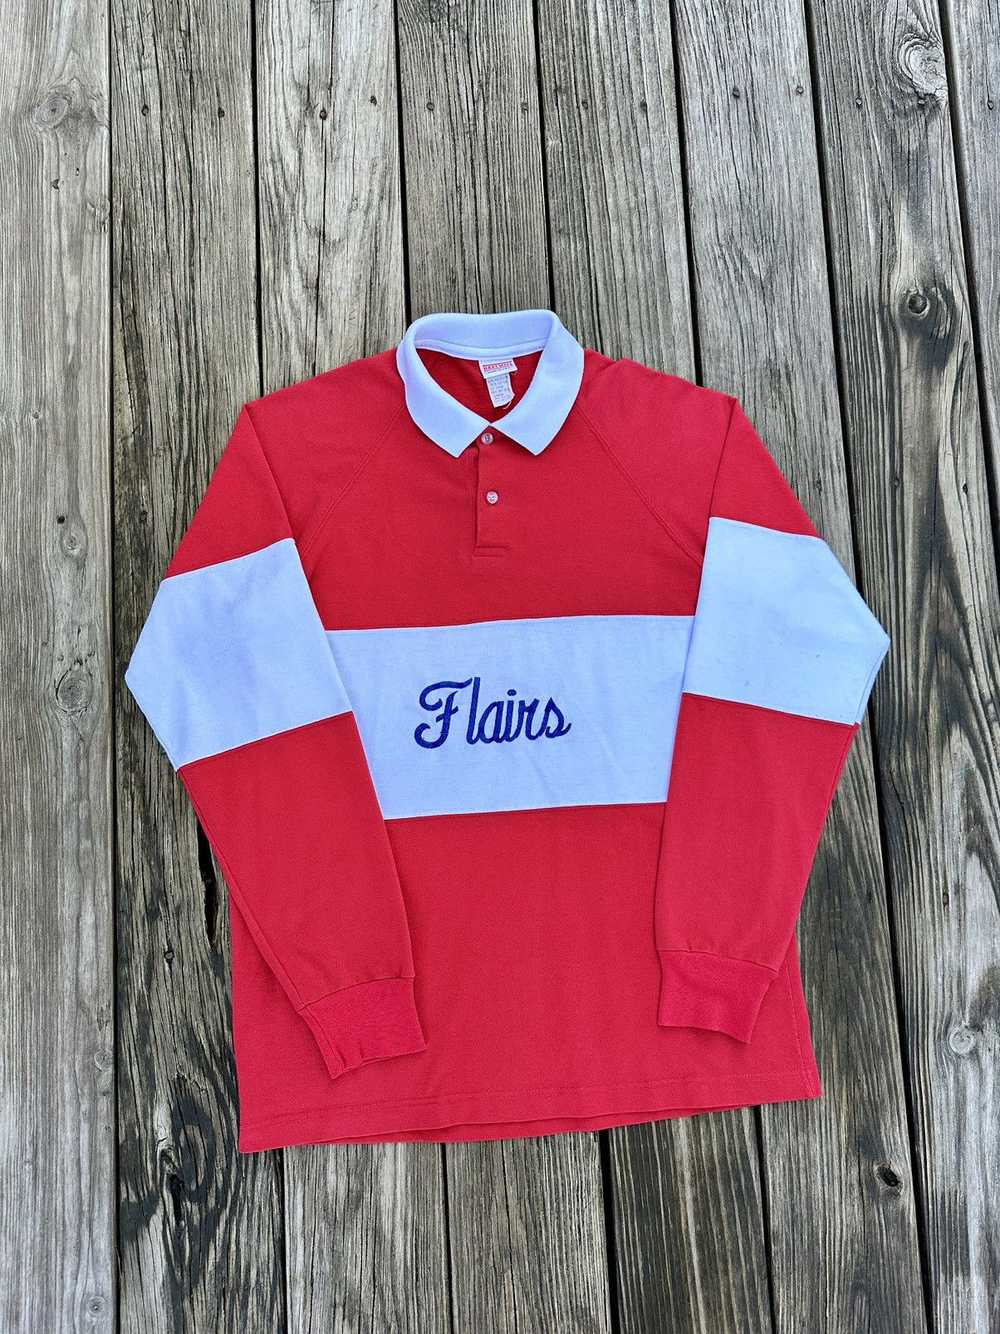 Vintage Vintage 1980's Rugby Polo Shirt - image 2